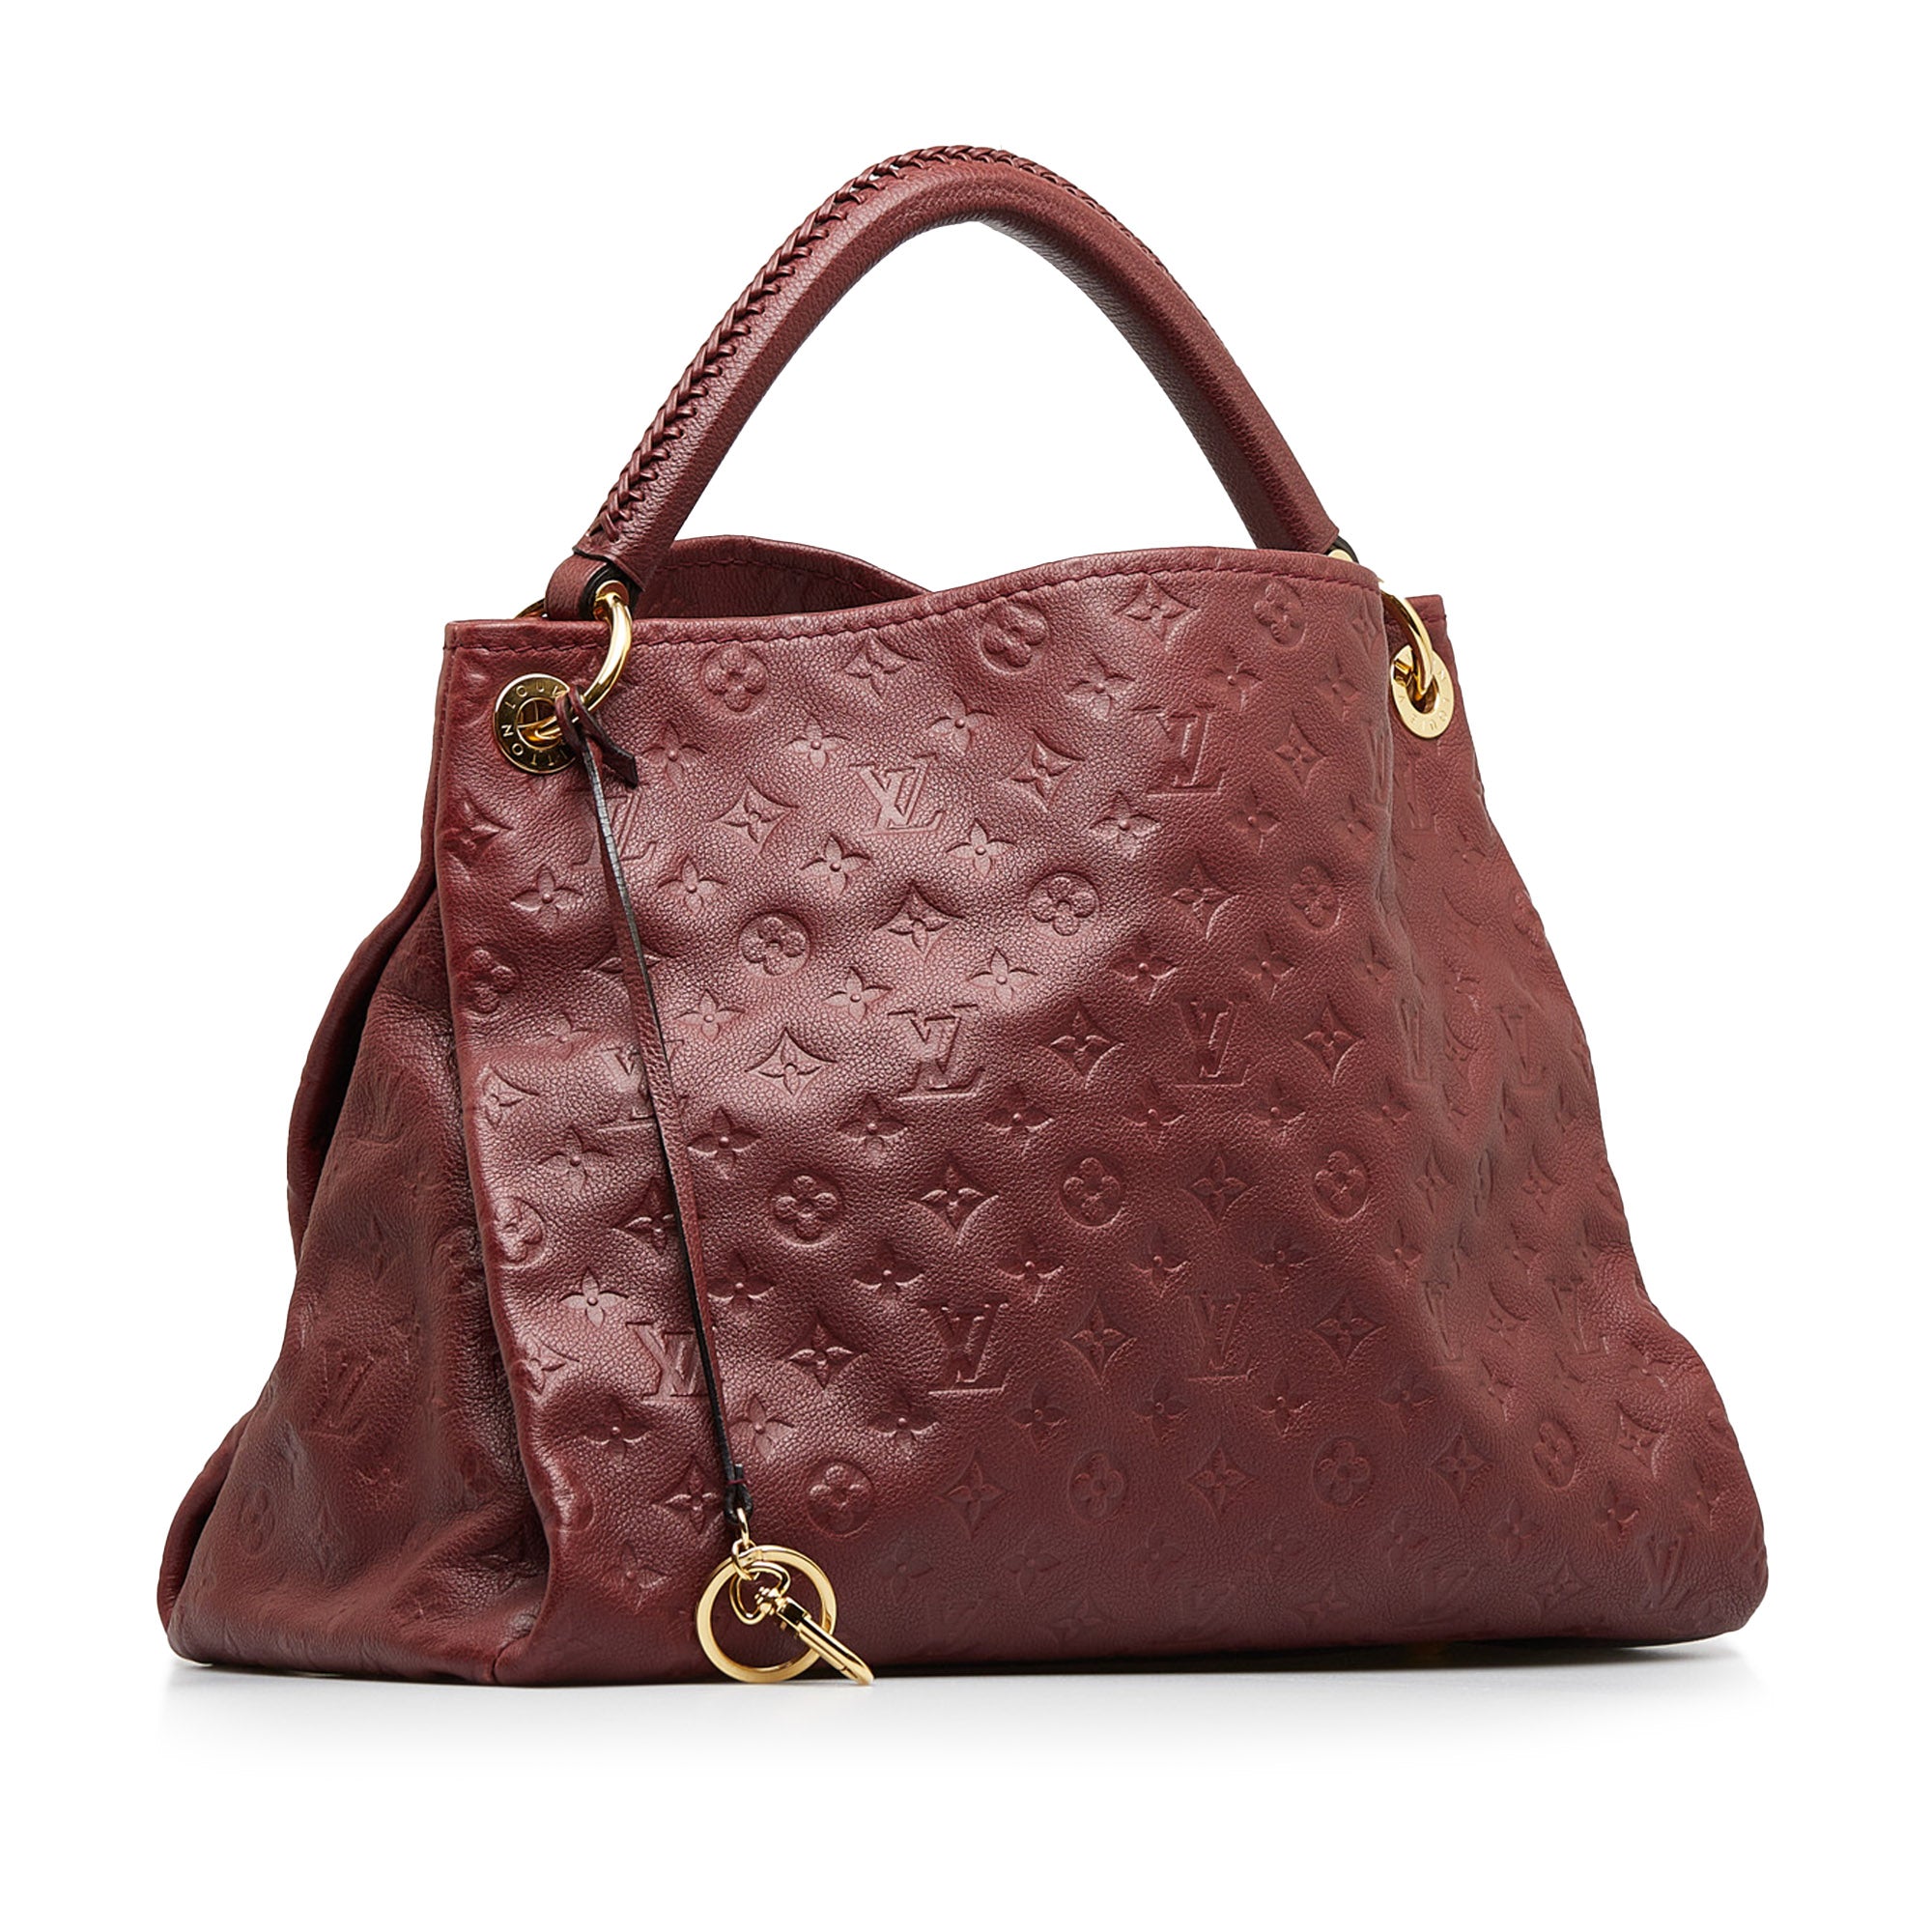 Louis Vuitton Artsy Leather Exterior Bags & Handbags for Women, Authenticity Guaranteed